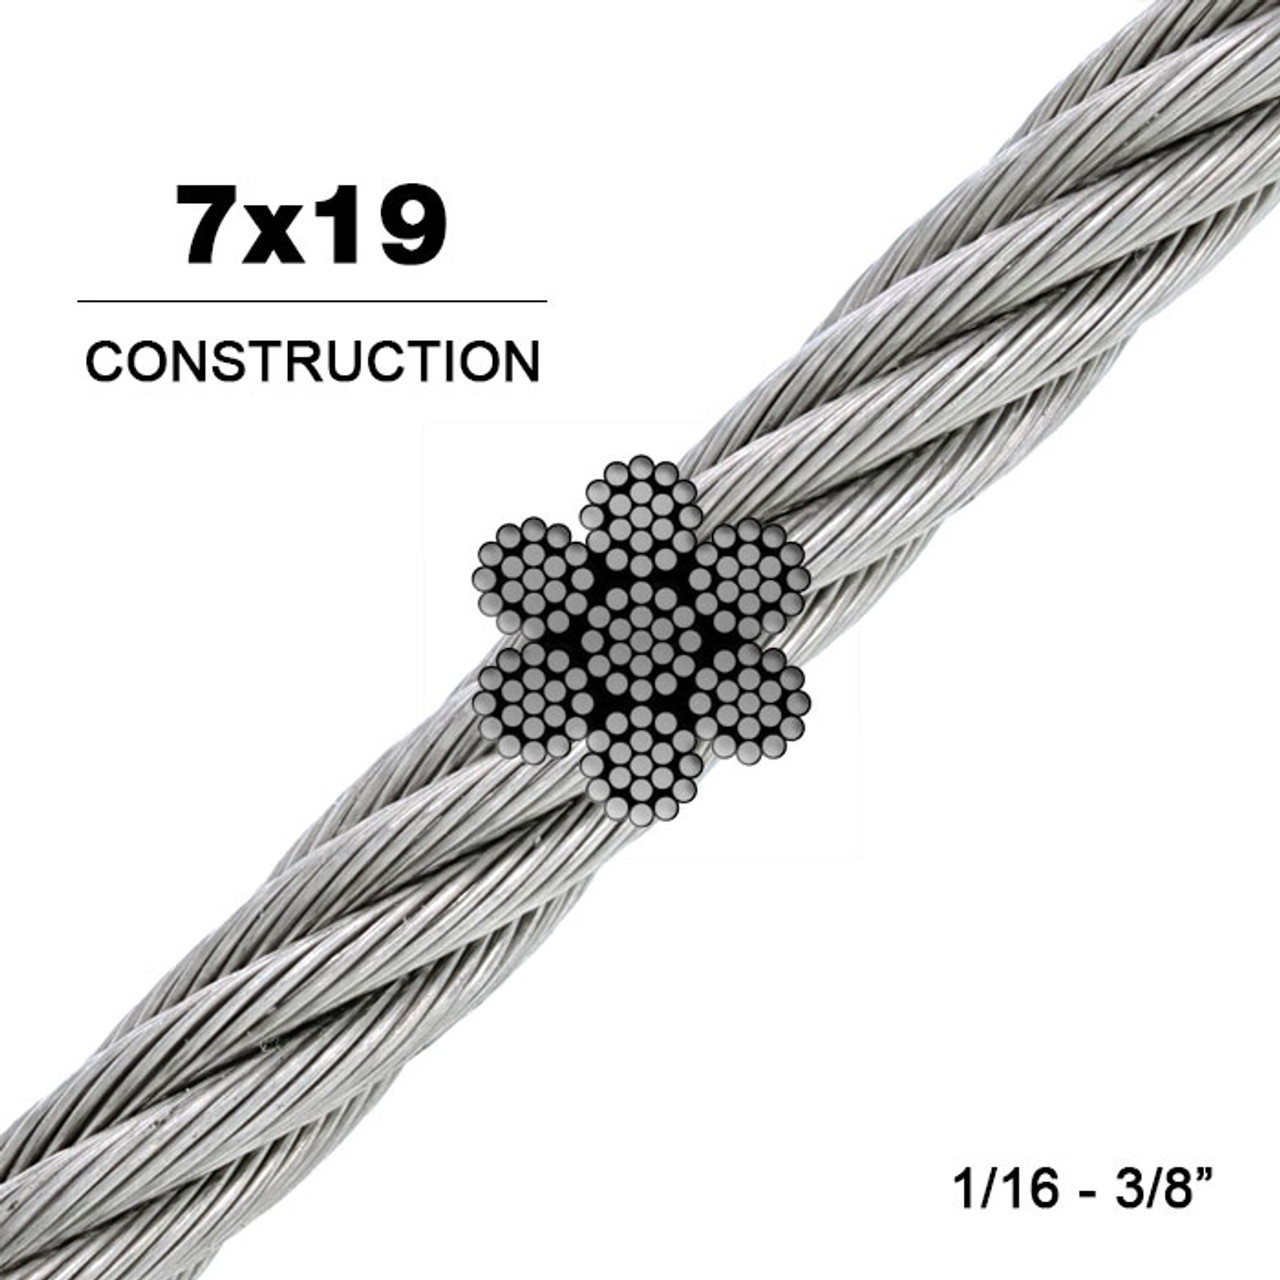 T-304 Grade 7 x 19 Stainless Steel Cable Wire Rope 1/4" 500 ft 